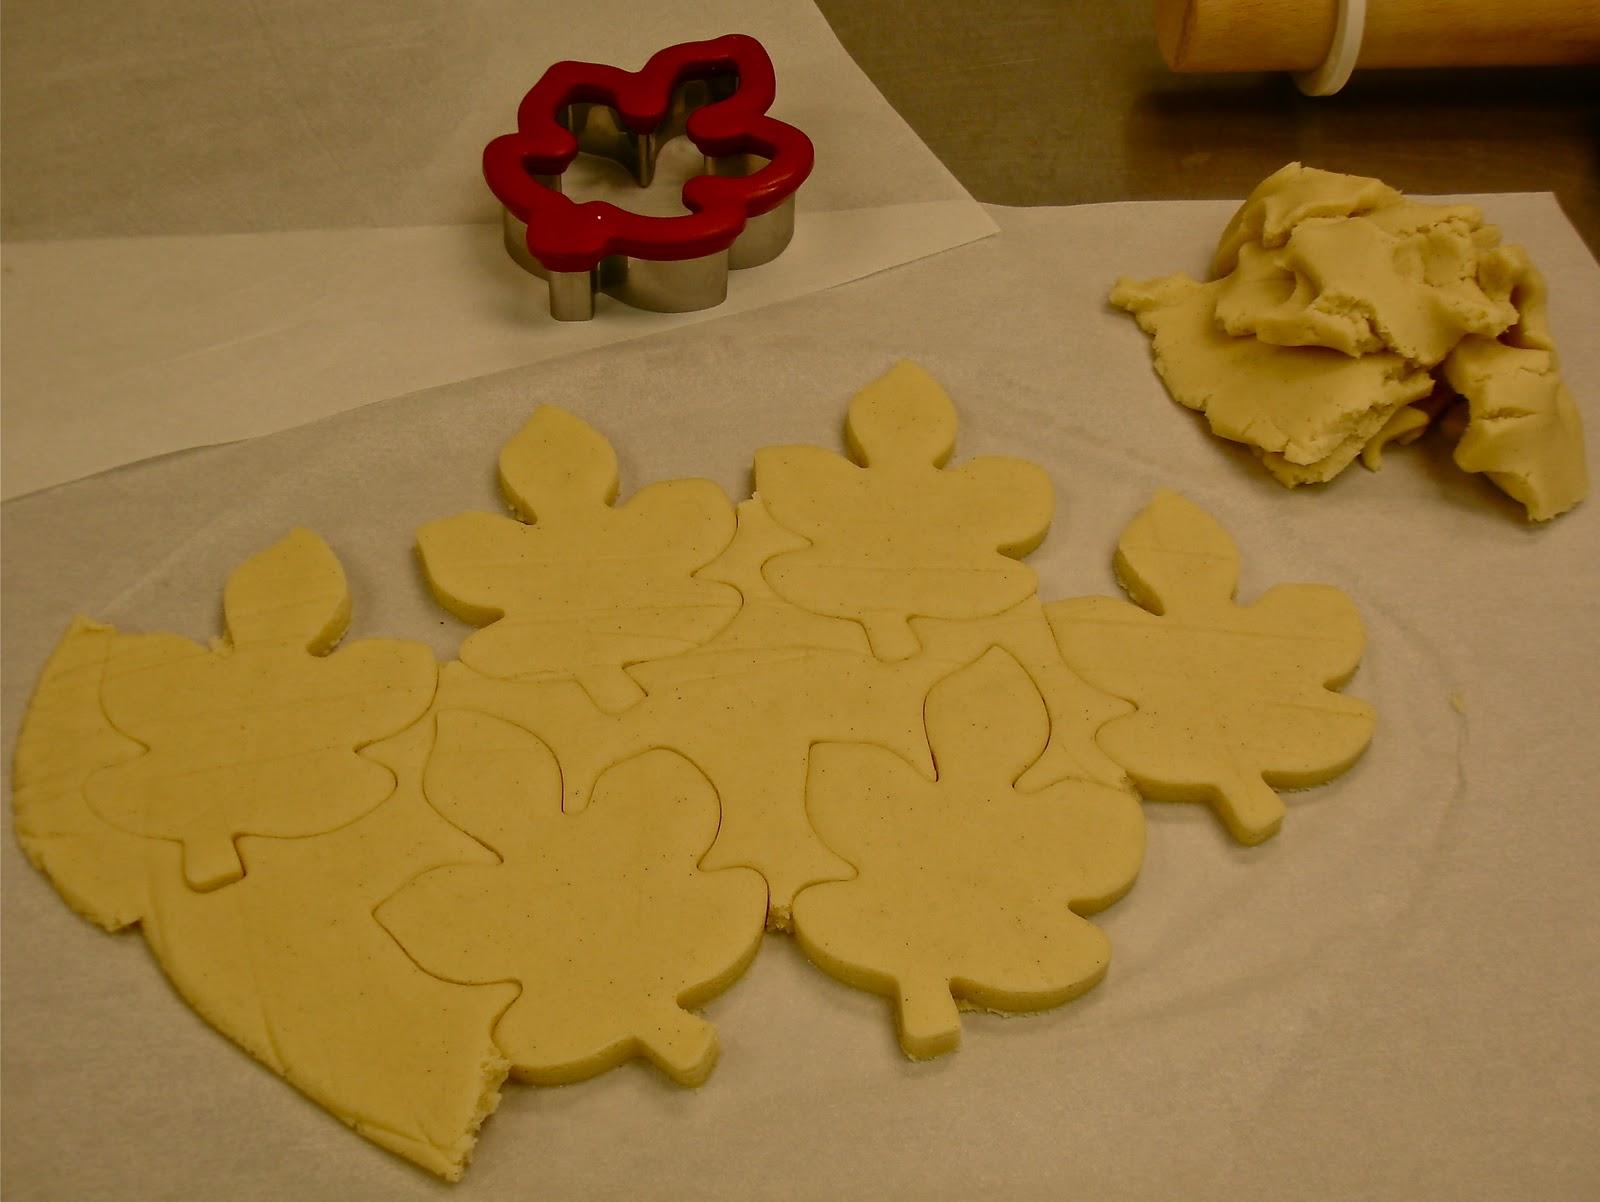 maple Leaf cookies will be the perfect favor at her Autumn wedding!